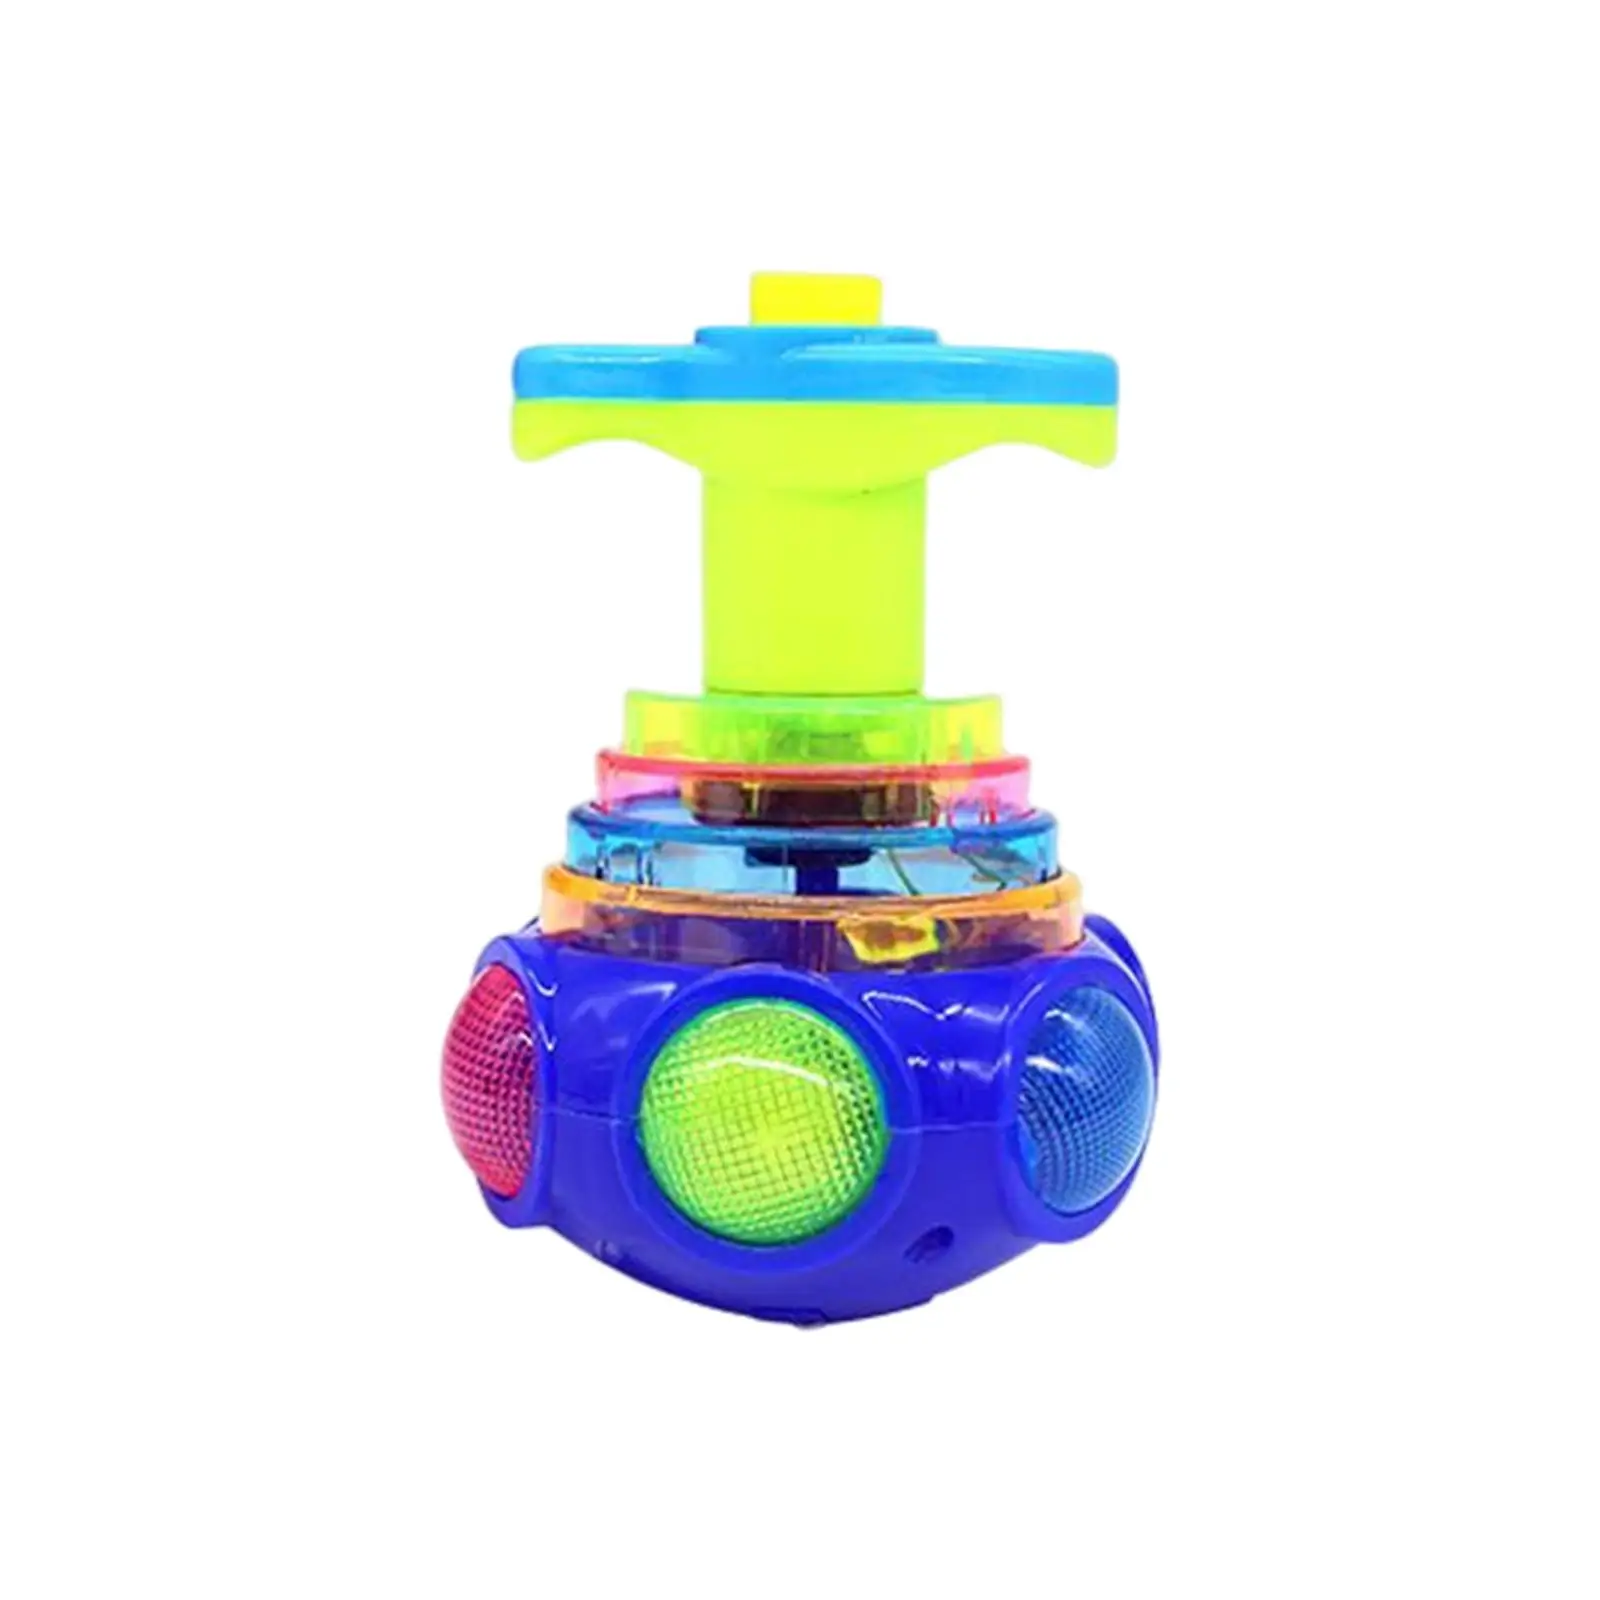 Spin Top Toy Musical Gyroscope LED Gyro spin Novelty Flashing spin Music Gyroscope